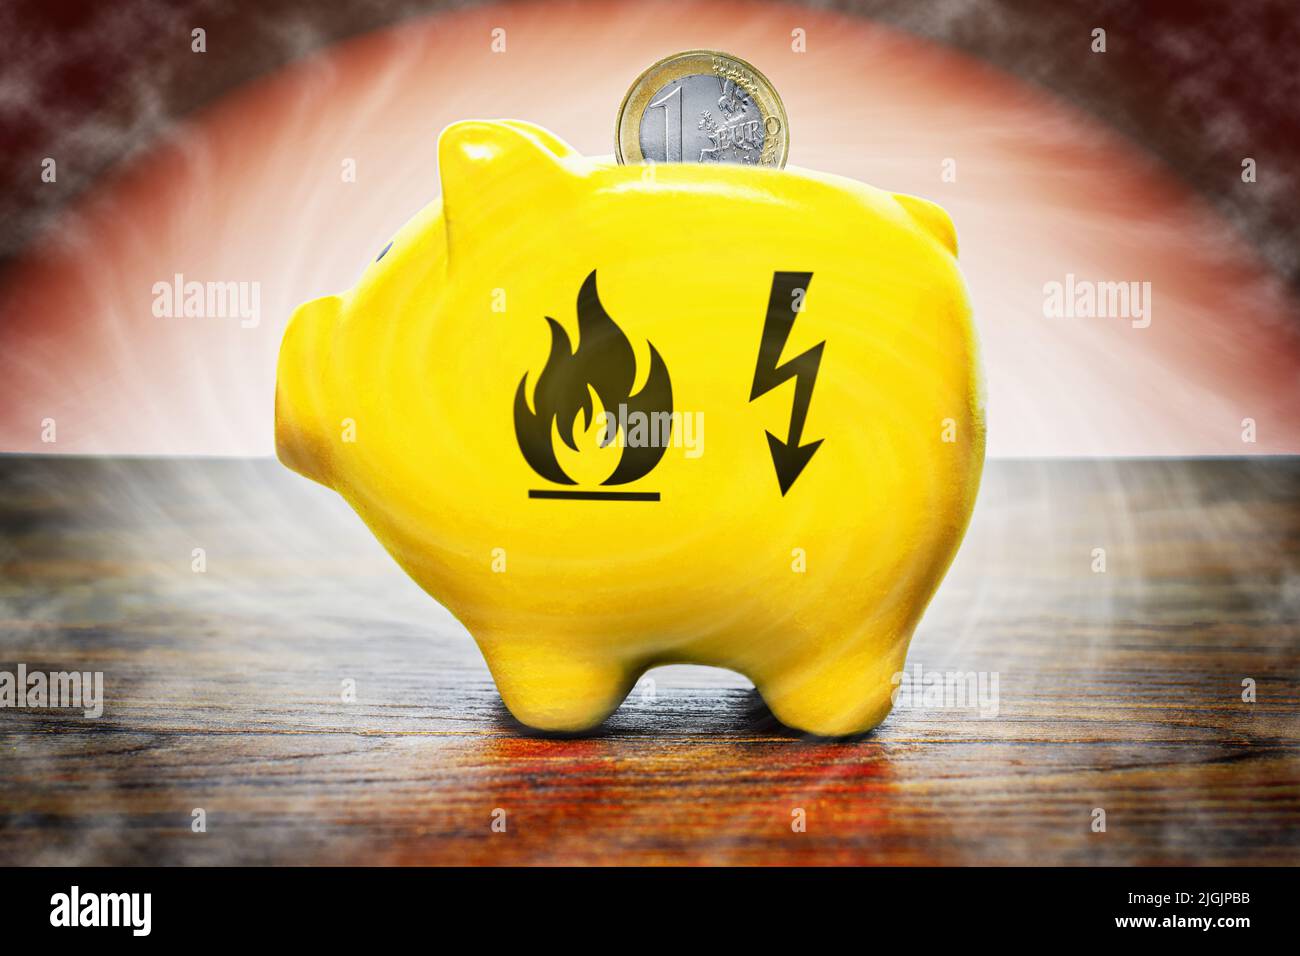 Gas And Energy Symbol On A Piggy Bank Stock Photo